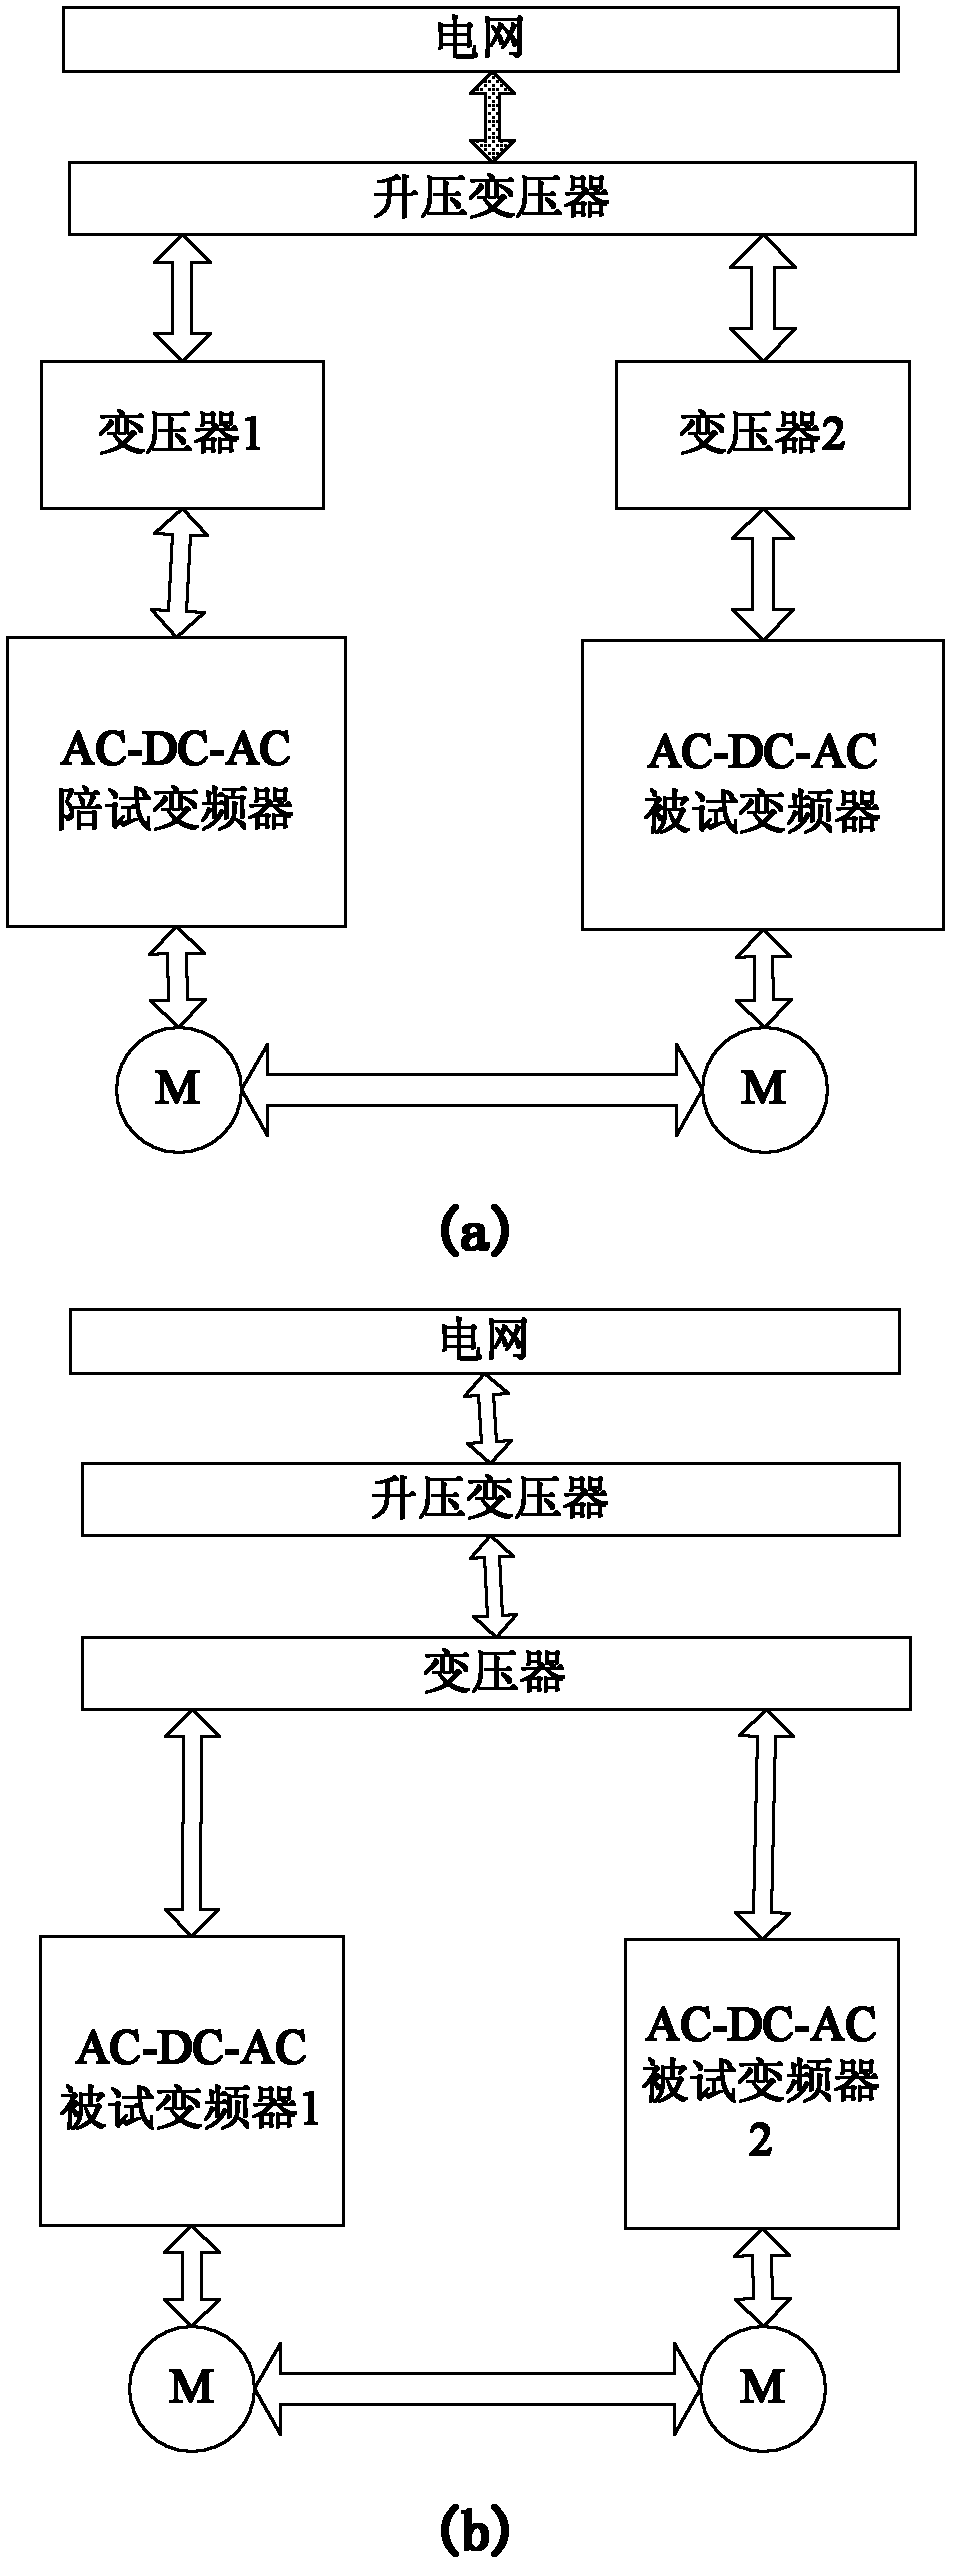 Power checking system for frequency converter adopting one-way energy transmitting and rectifying mode and testing method thereof